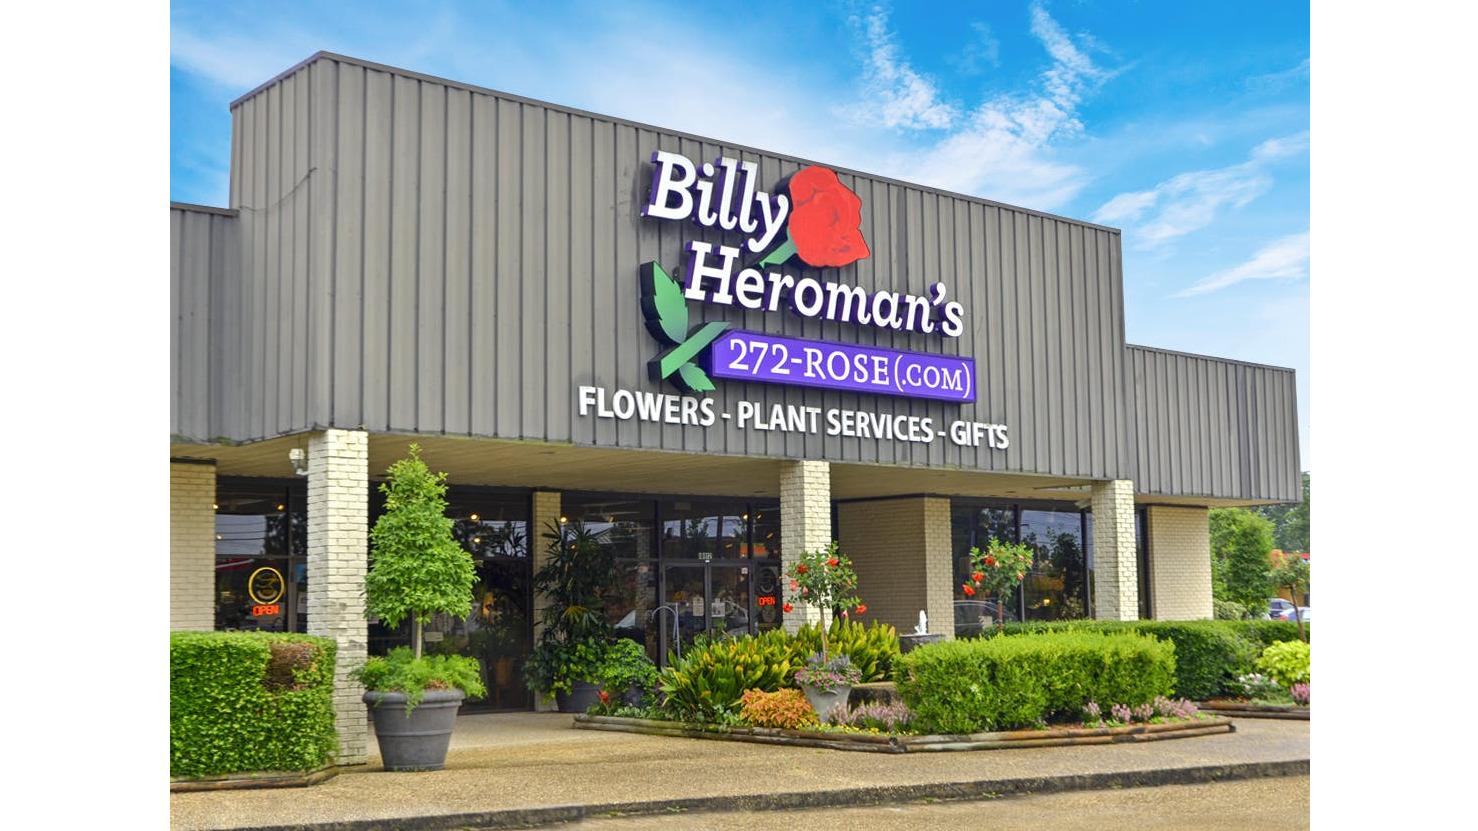 Billy Heroman's Flowers & Gifts Plantscaping